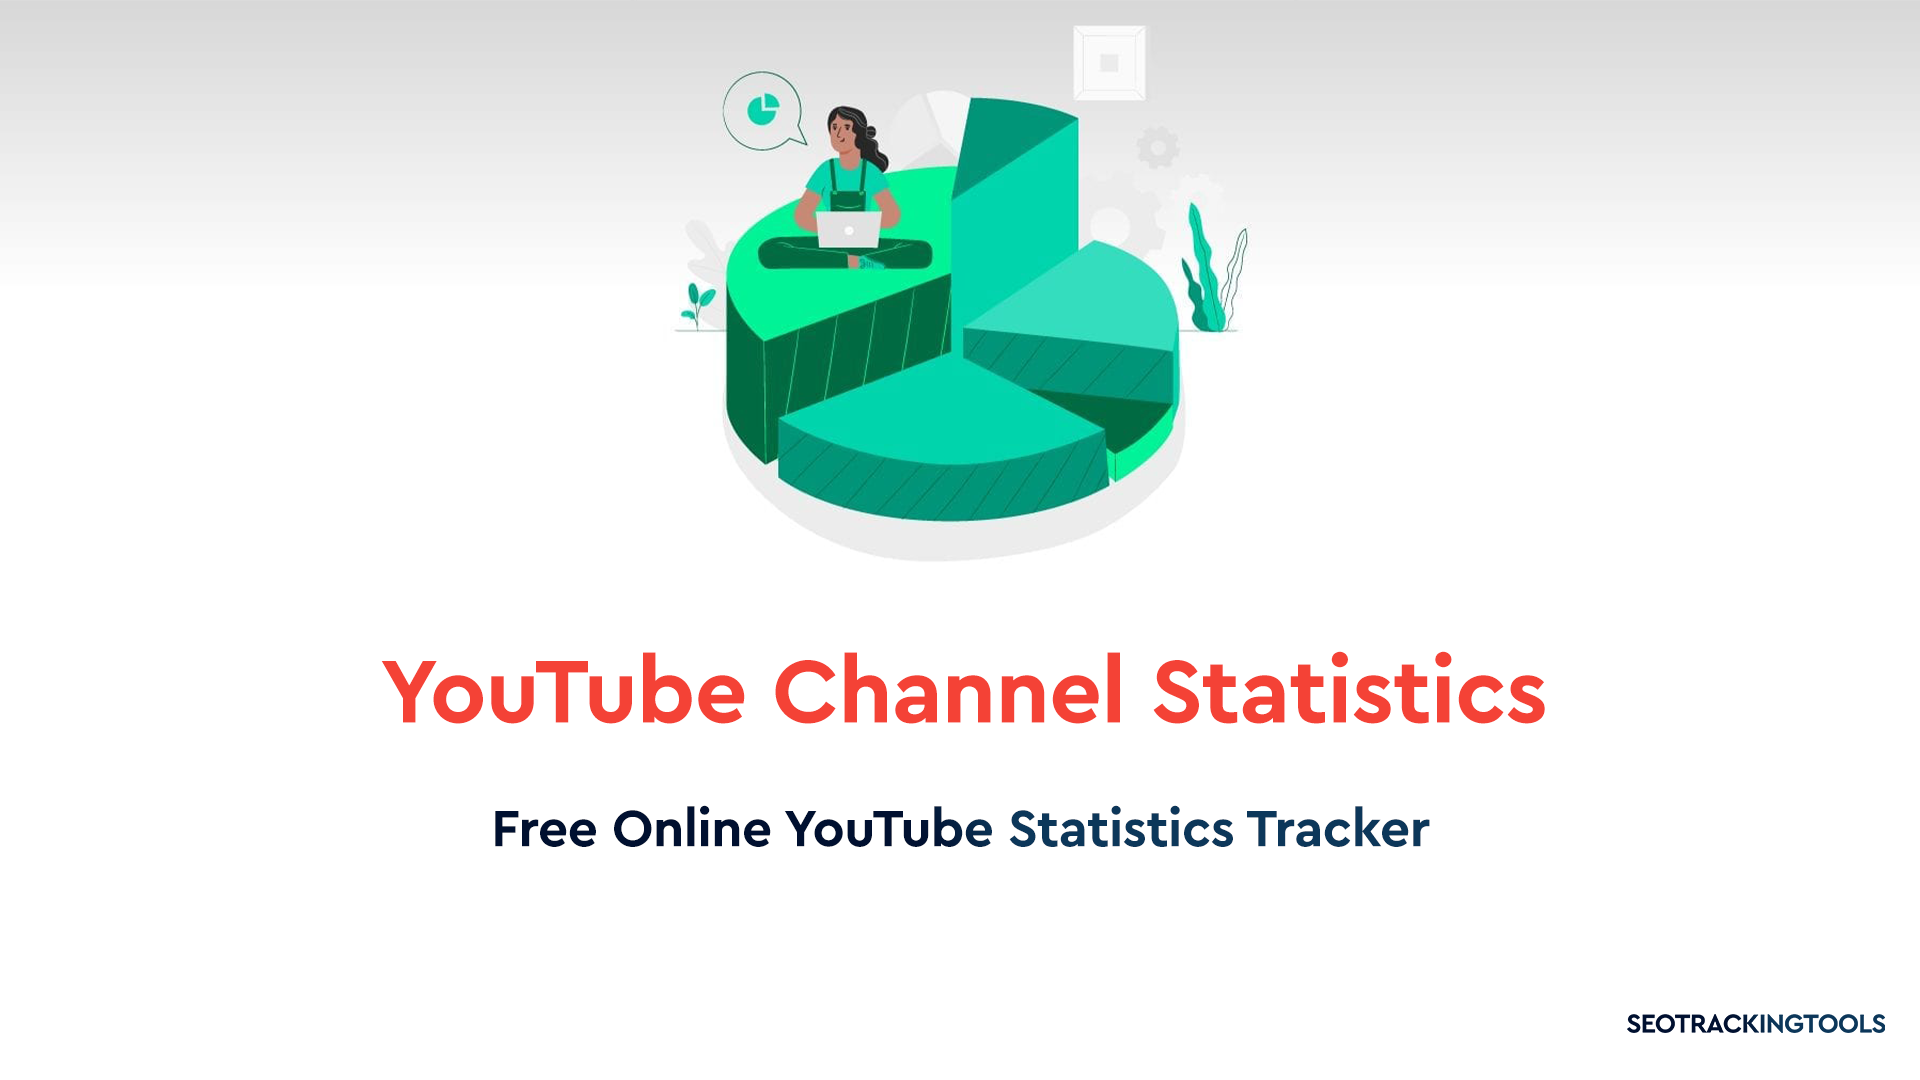 Free Online YouTube Channel Statistics